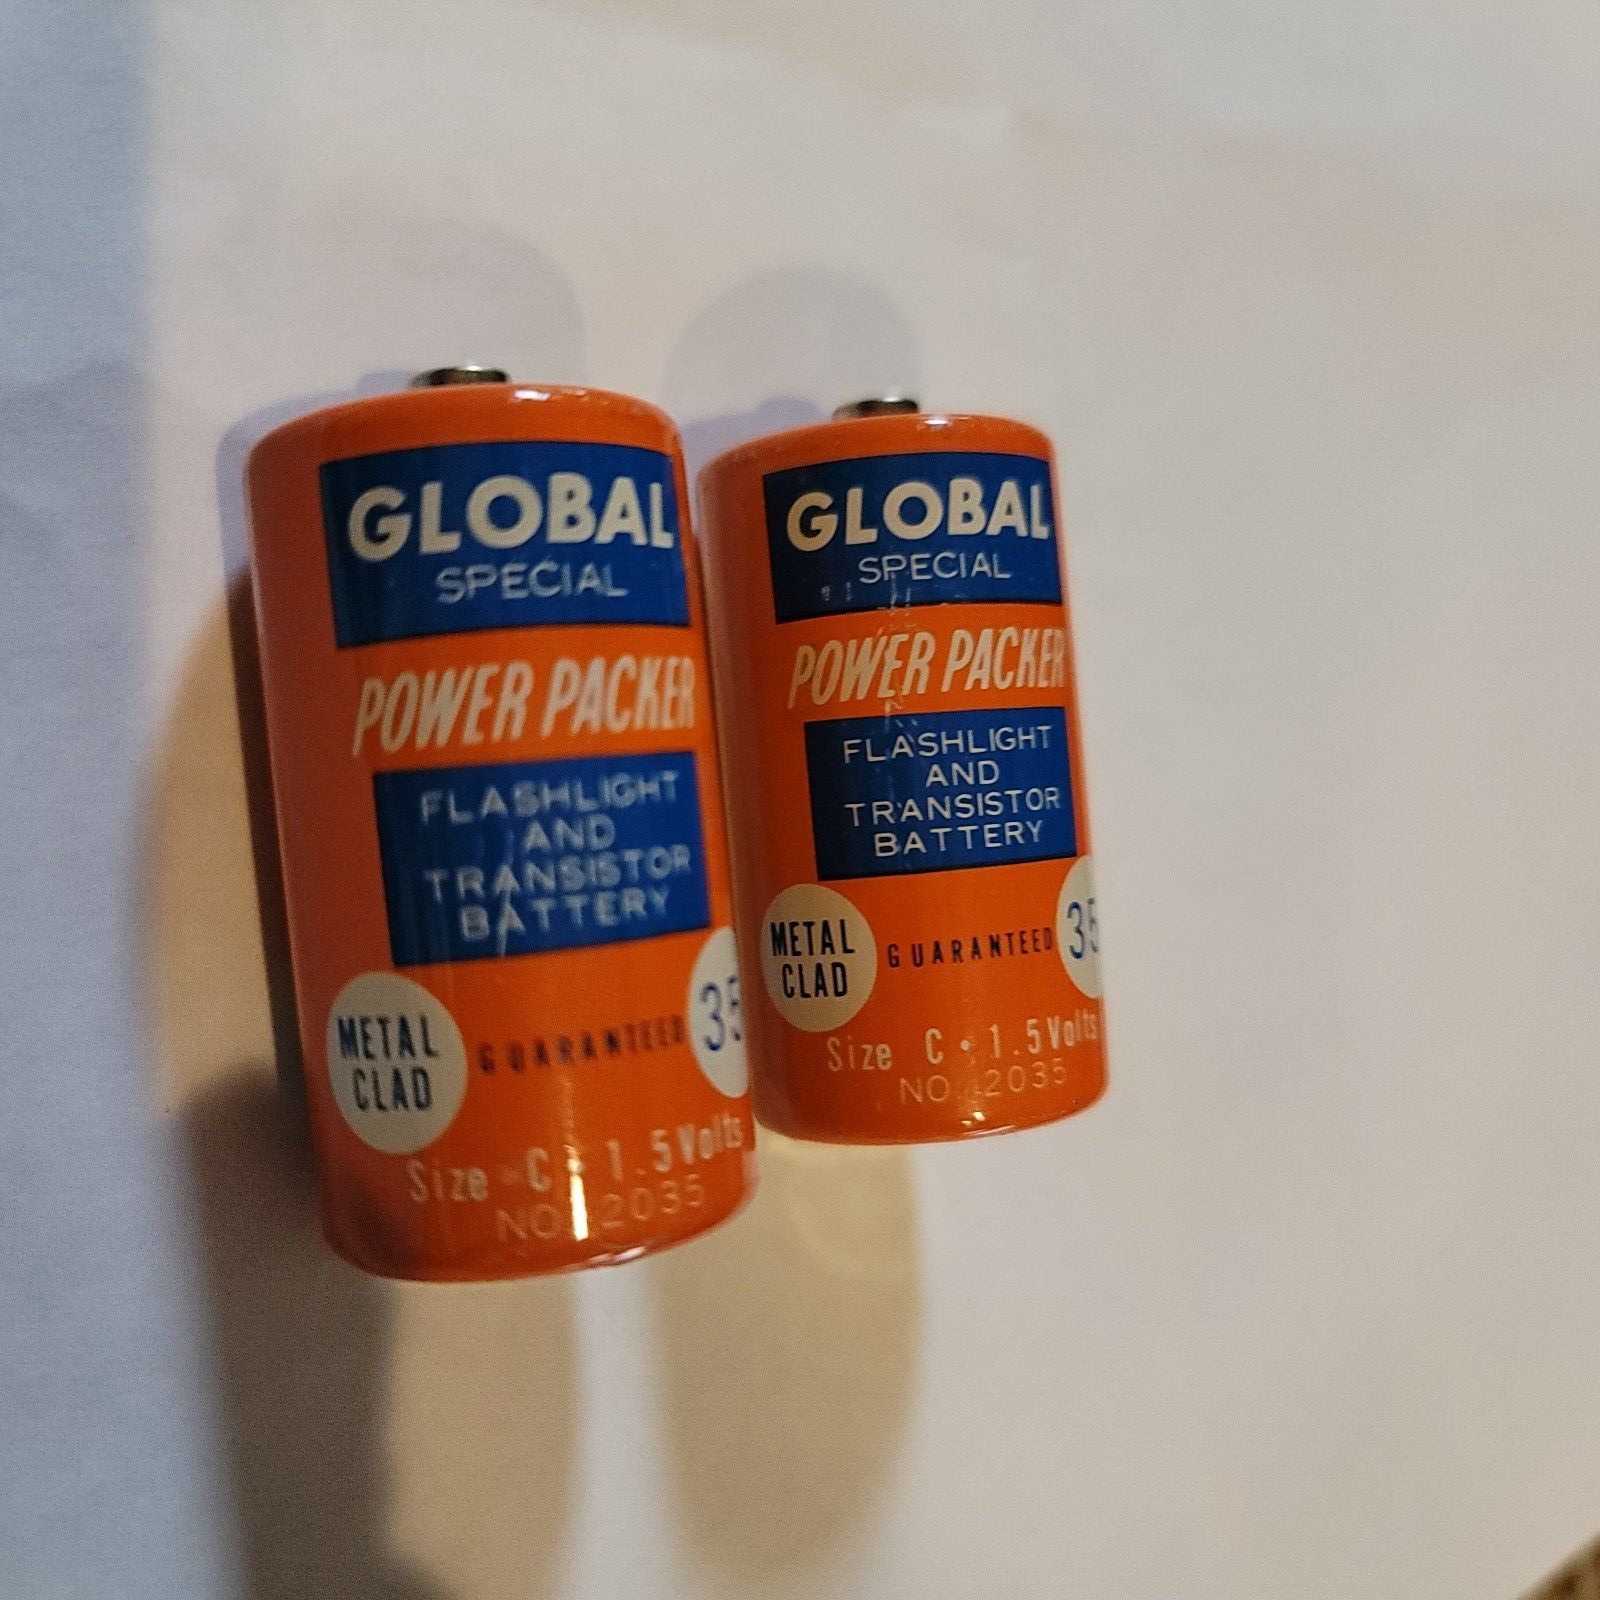 2 Vintage Rare GLOBAL Special Power Packer Size C No 2035